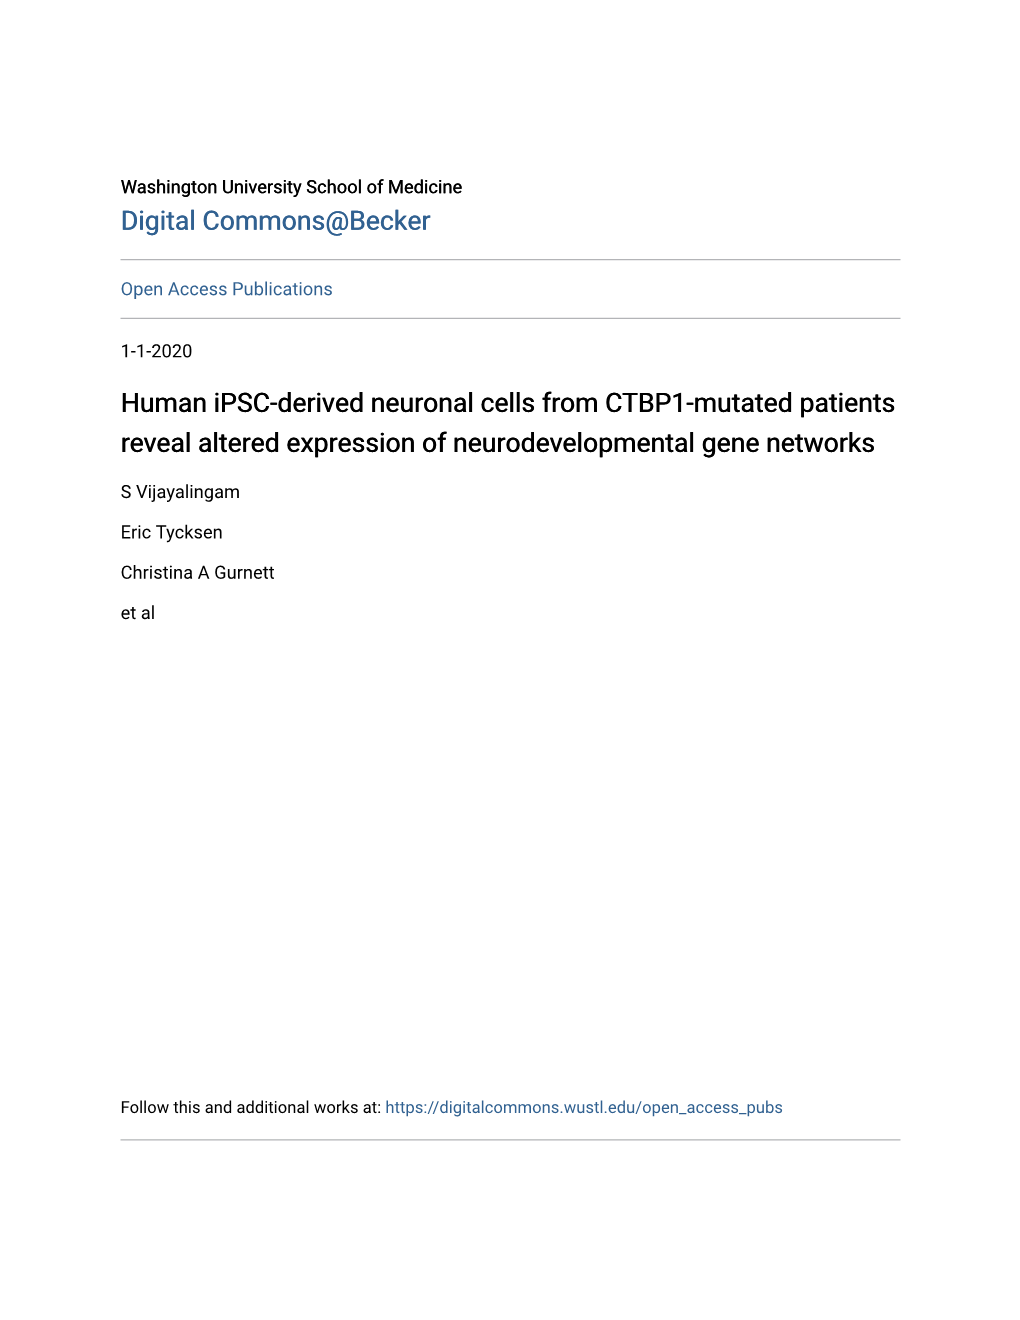 Human Ipsc-Derived Neuronal Cells from CTBP1-Mutated Patients Reveal Altered Expression of Neurodevelopmental Gene Networks